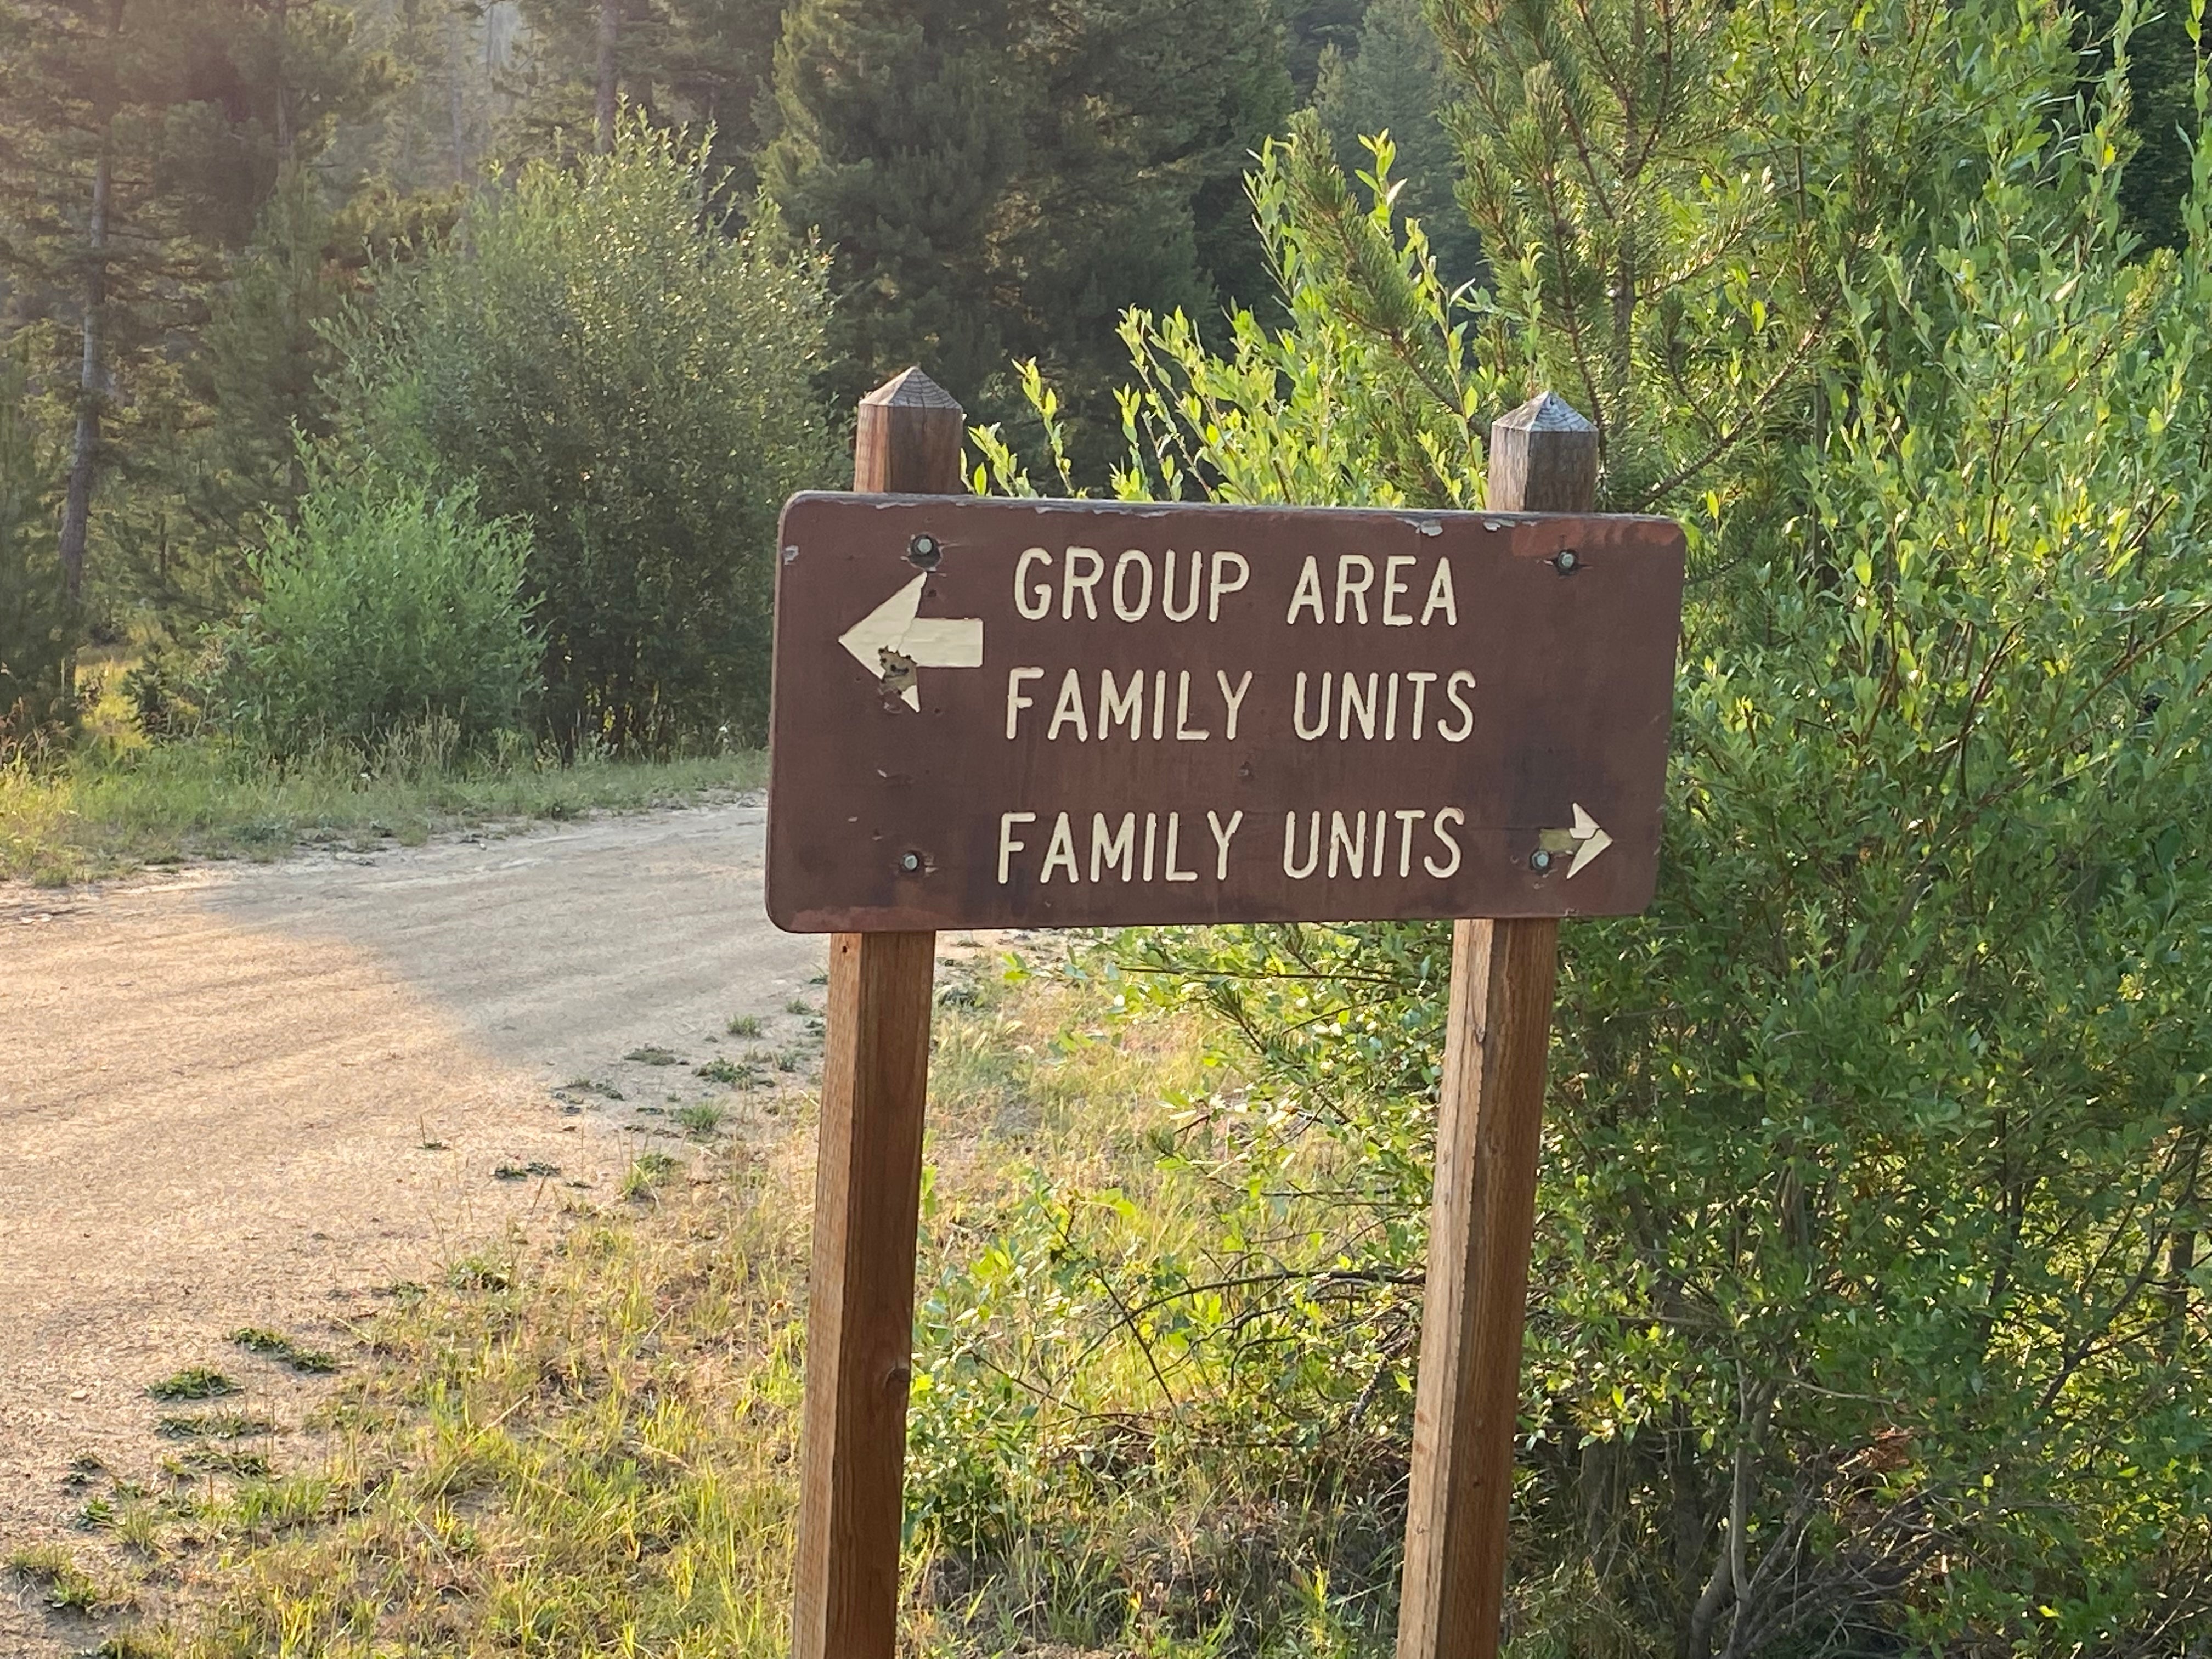 Camper submitted image from Orofino Campground - 4